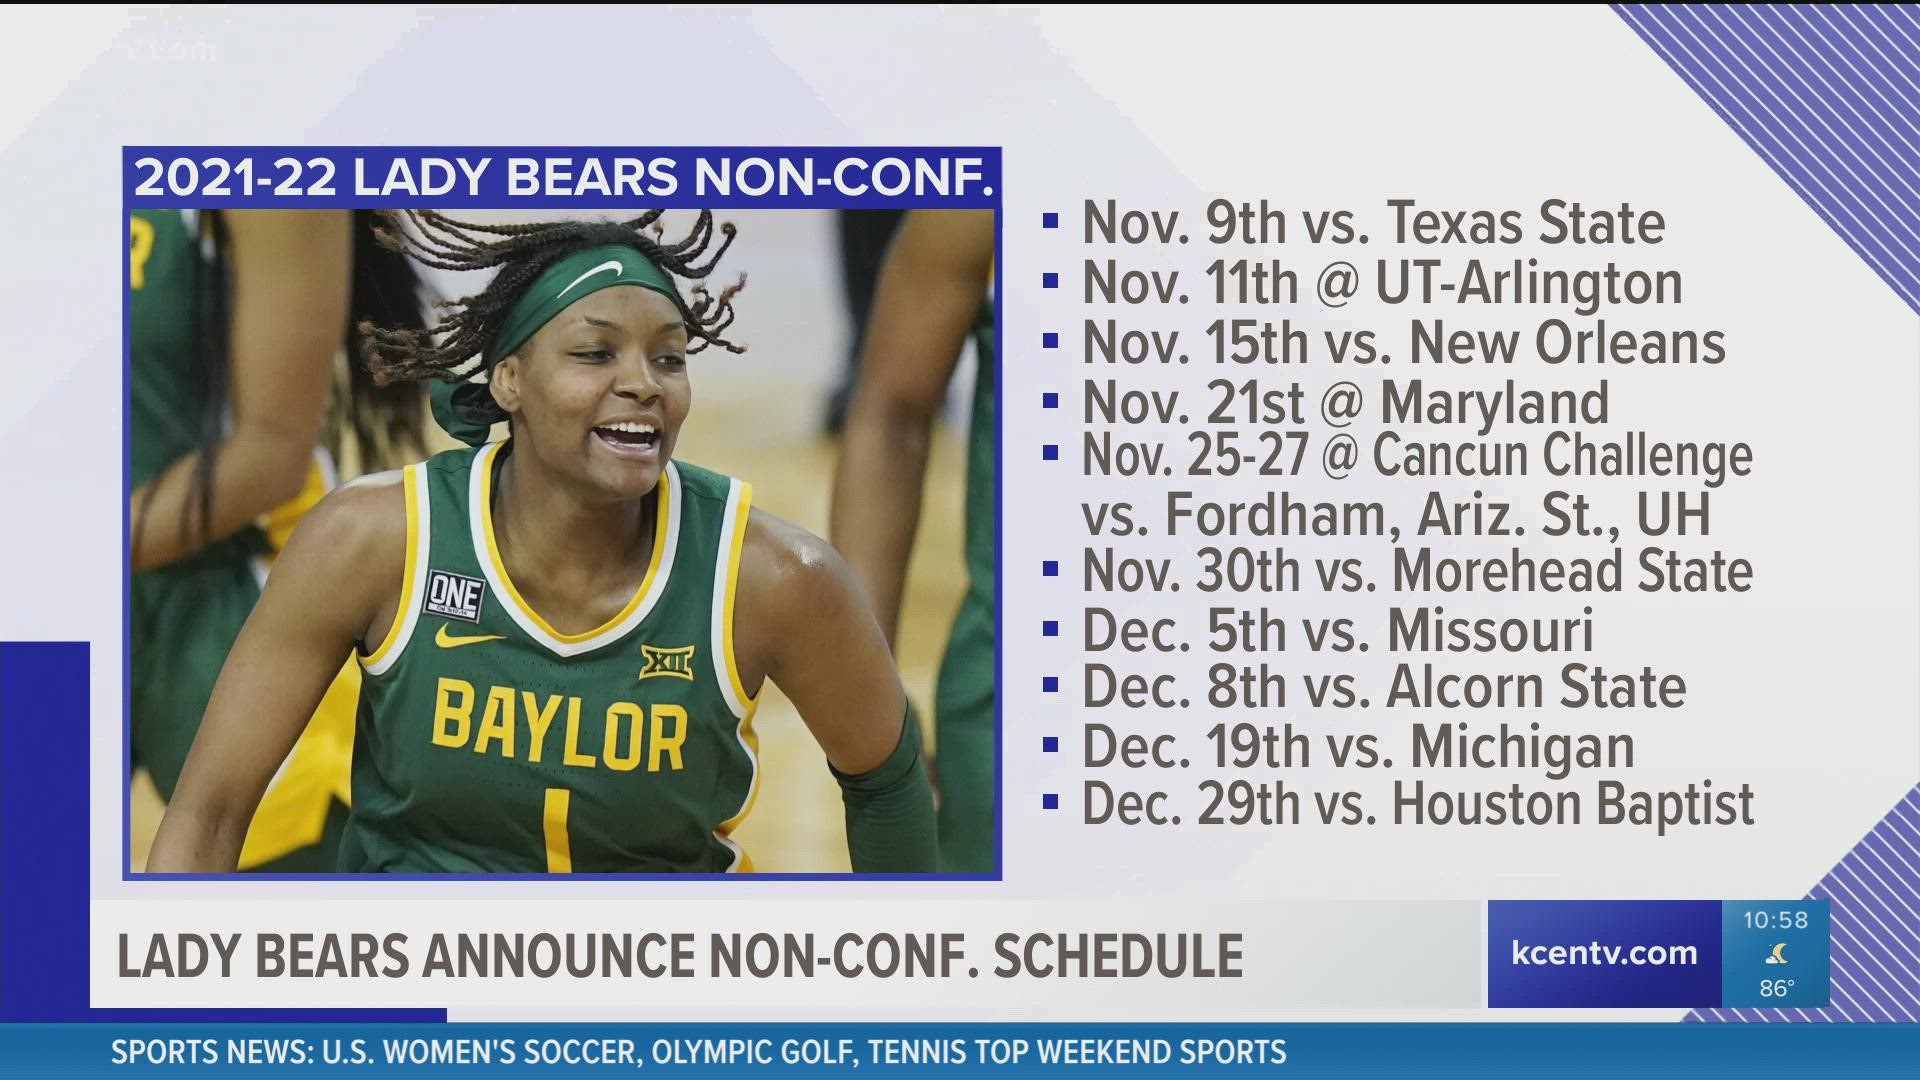 The Lady Bears announced their non-conference schedule for the 2021-22 season.